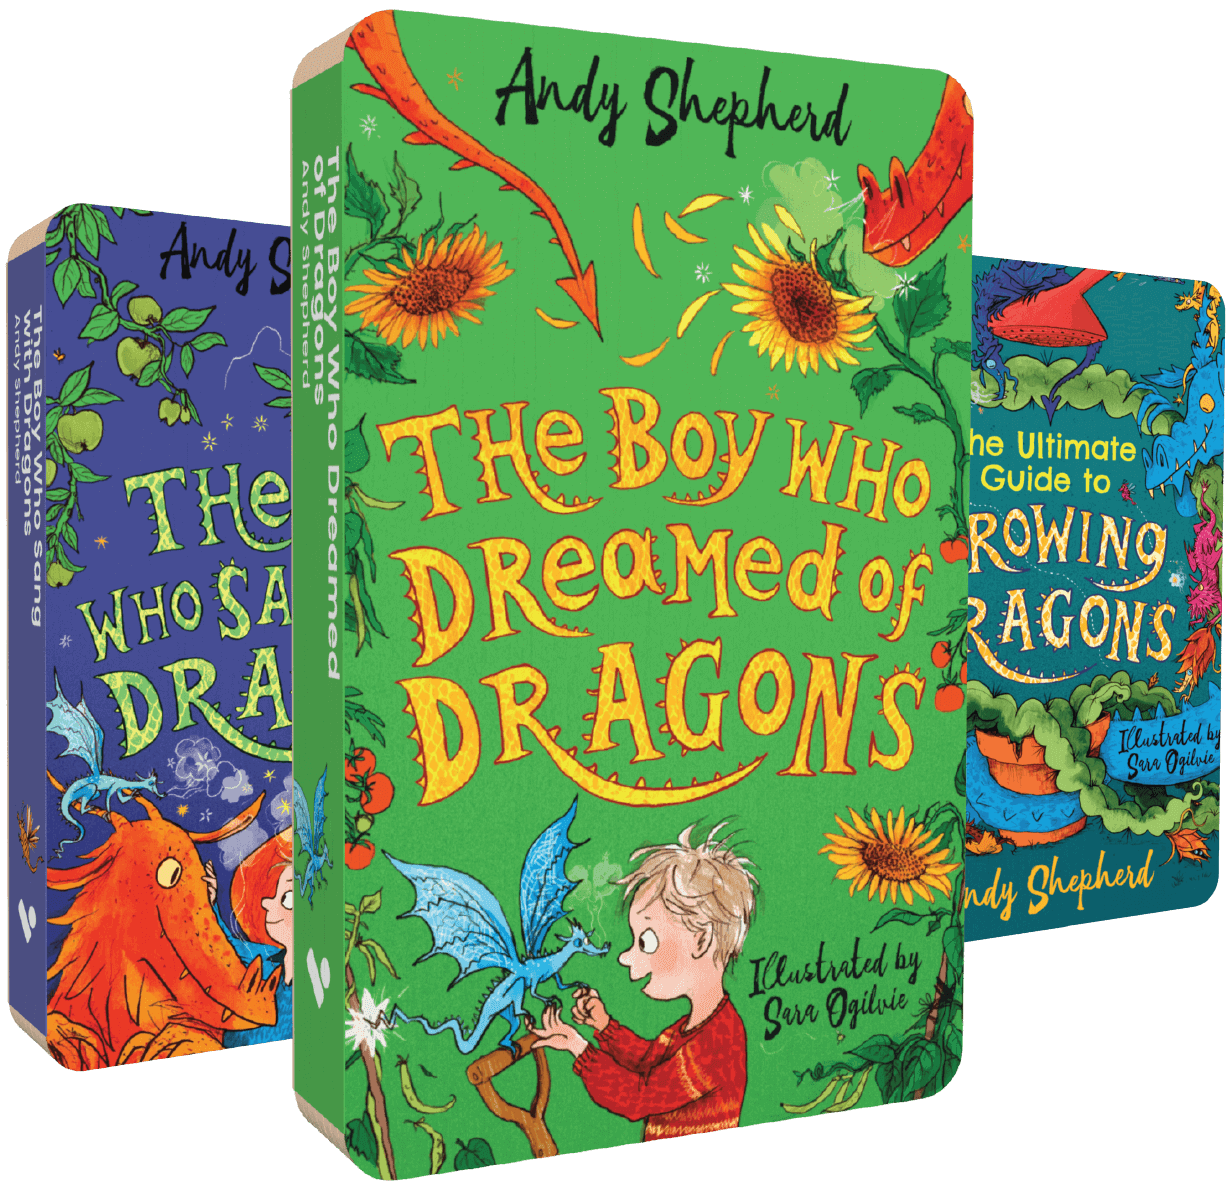 The Boy Who Dreamed of Dragons Audiobook Bundle